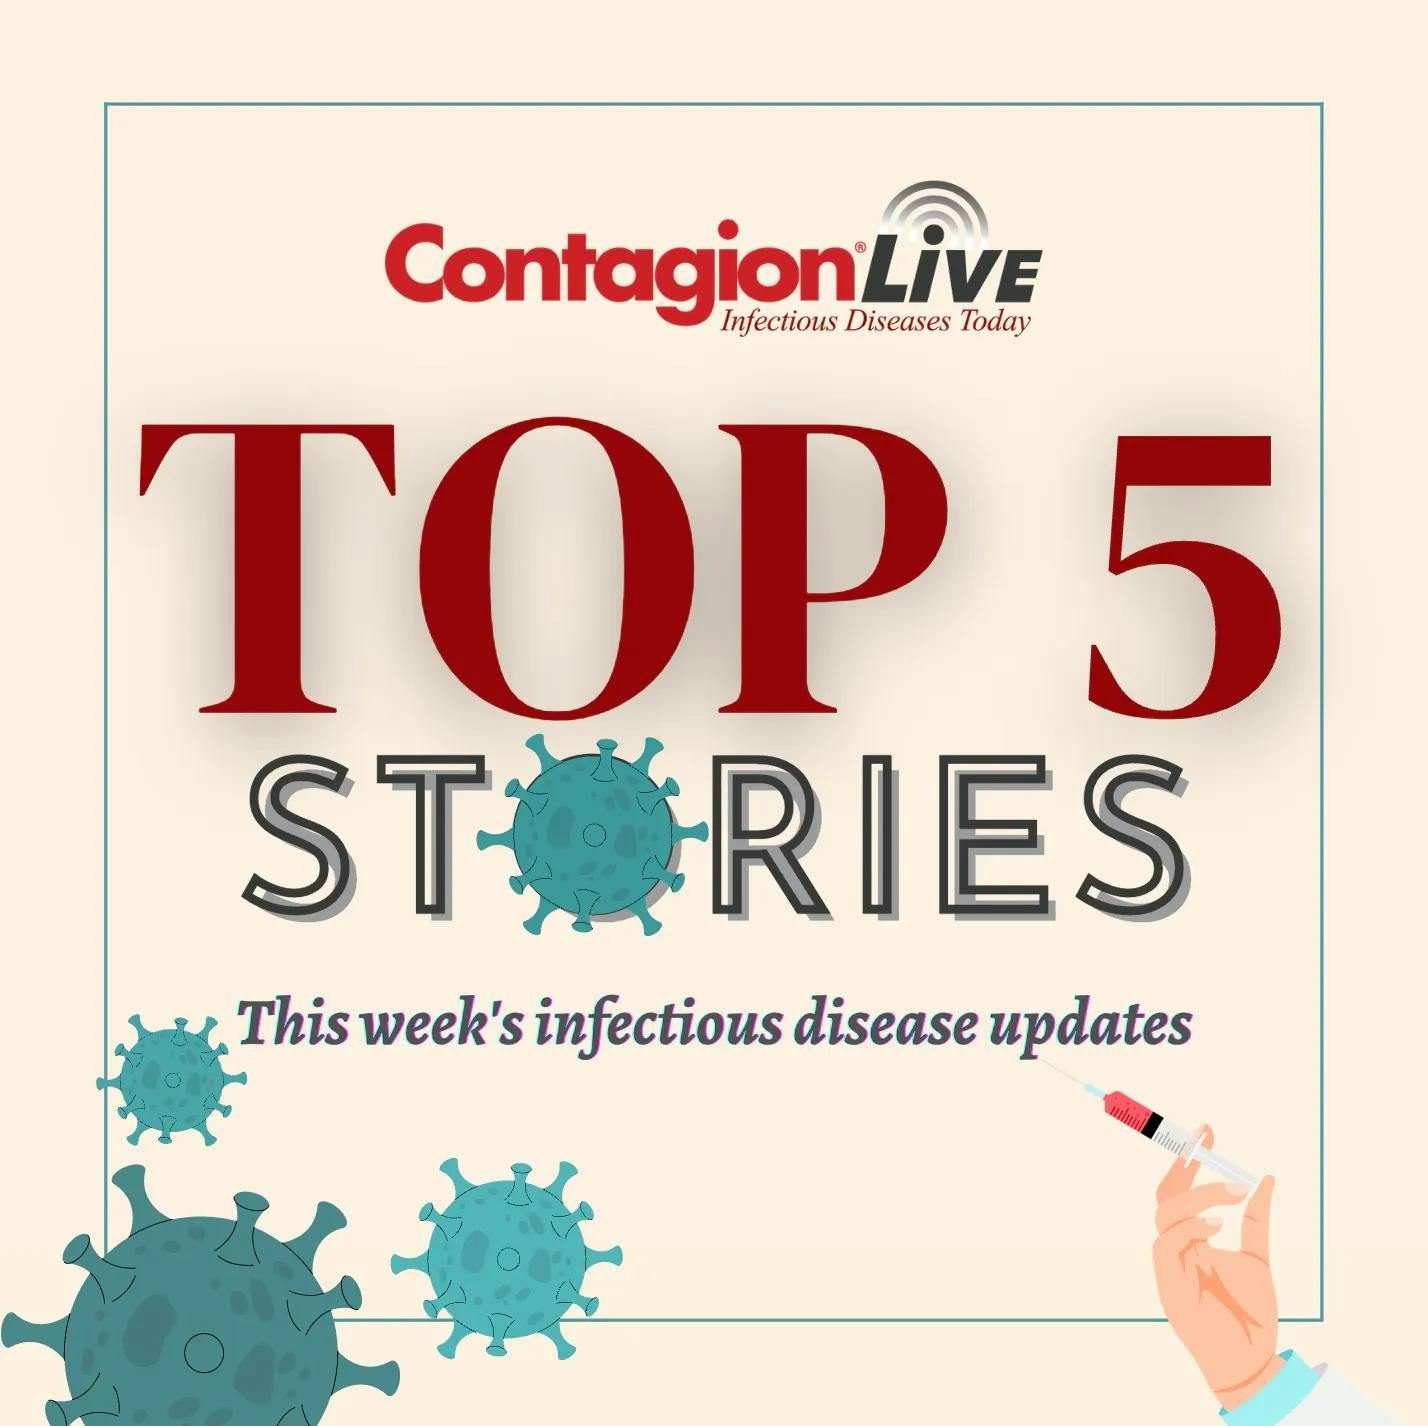 The Top 5 Infectious Disease Stories This Week